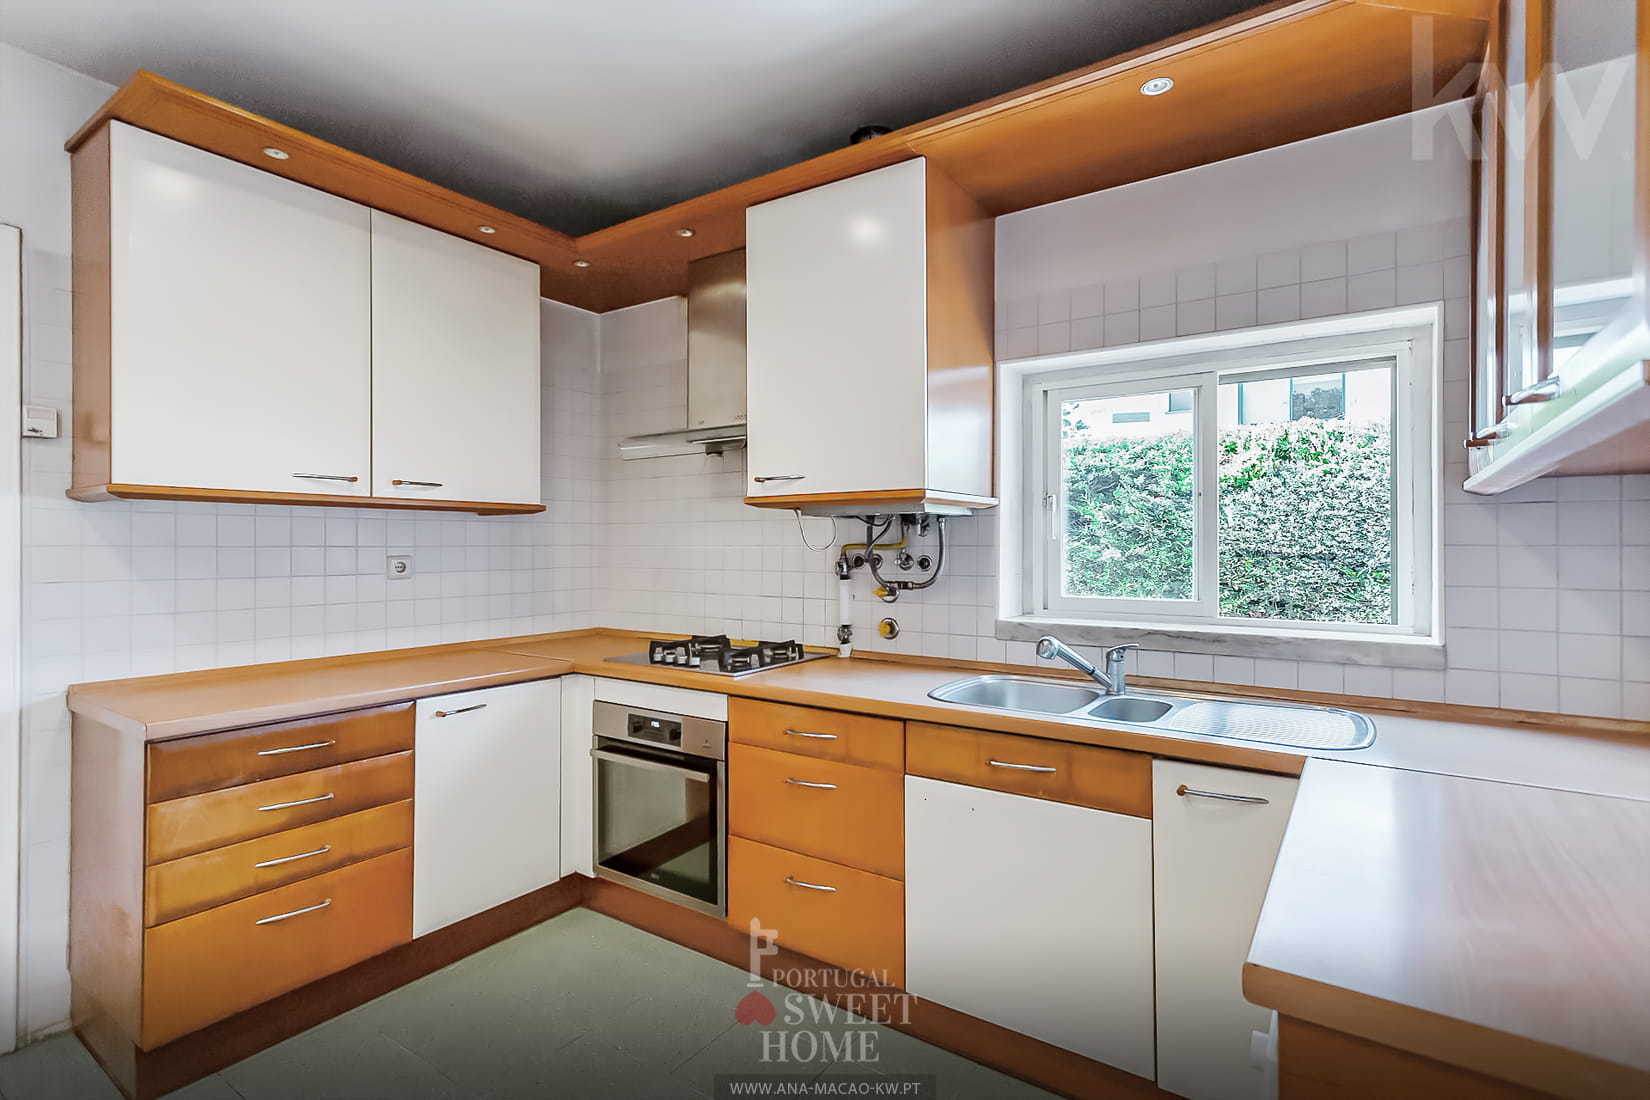 Kitchen (13.6 m²) fully equipped